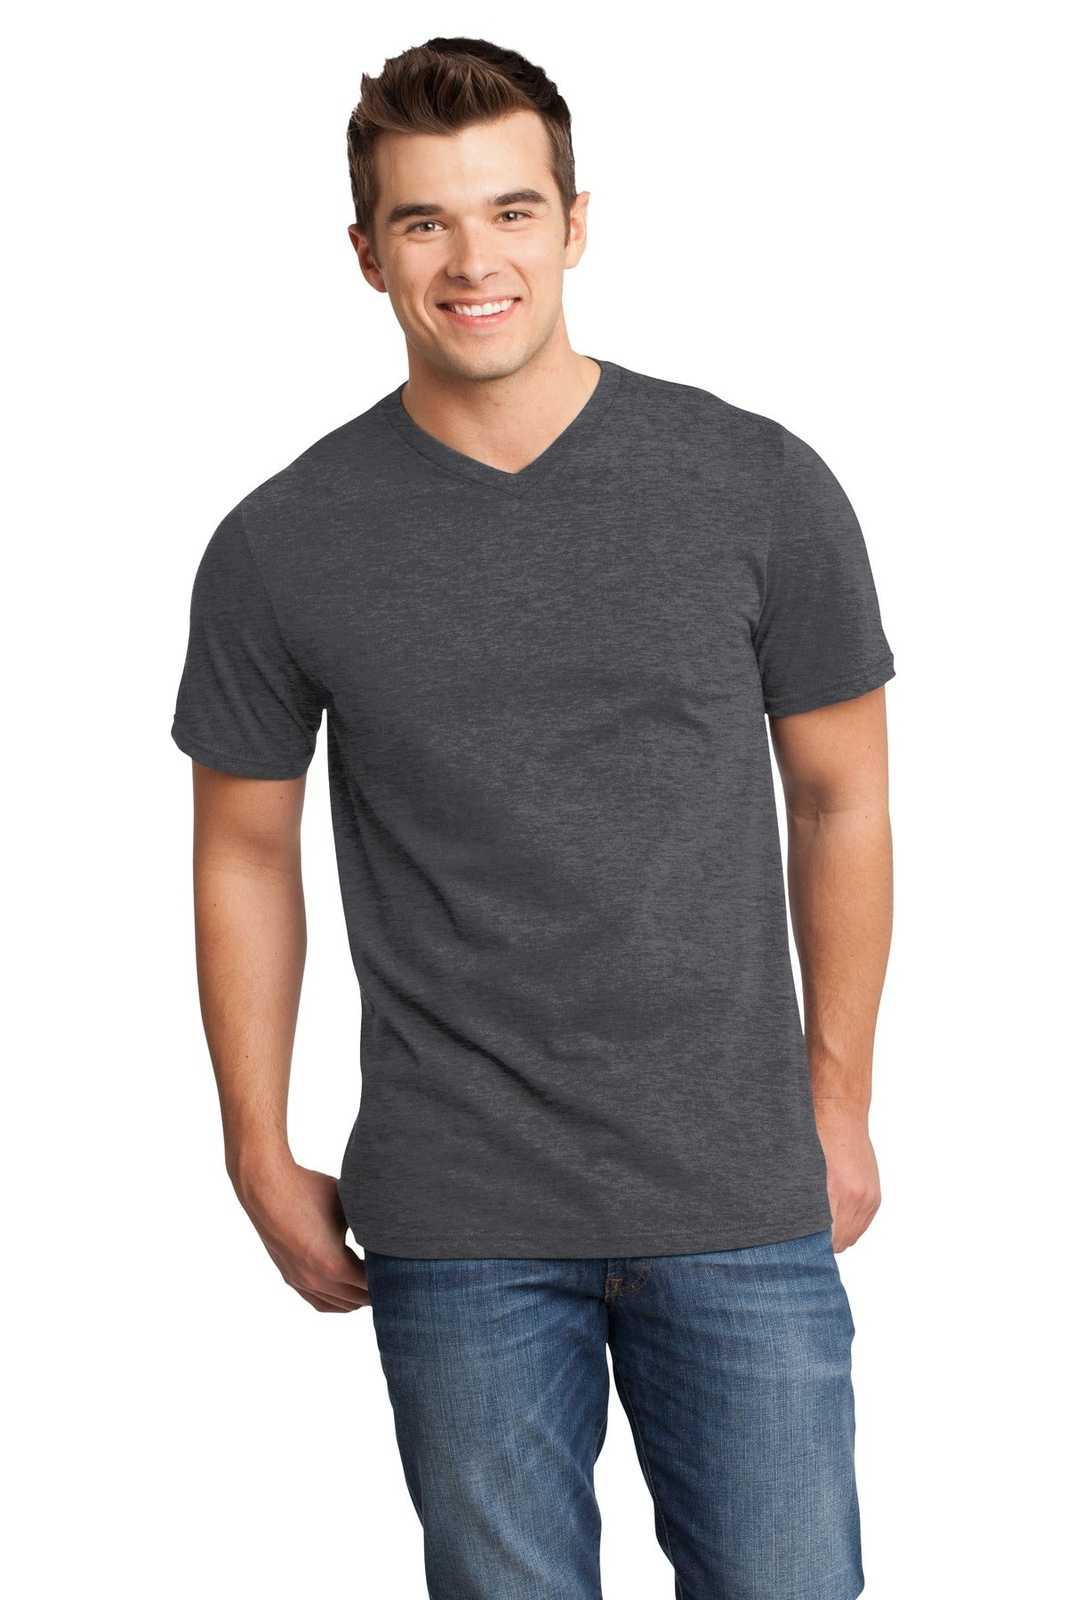 District DT6500 Very Important Tee V-Neck - Heathered Charcoal - HIT a Double - 1